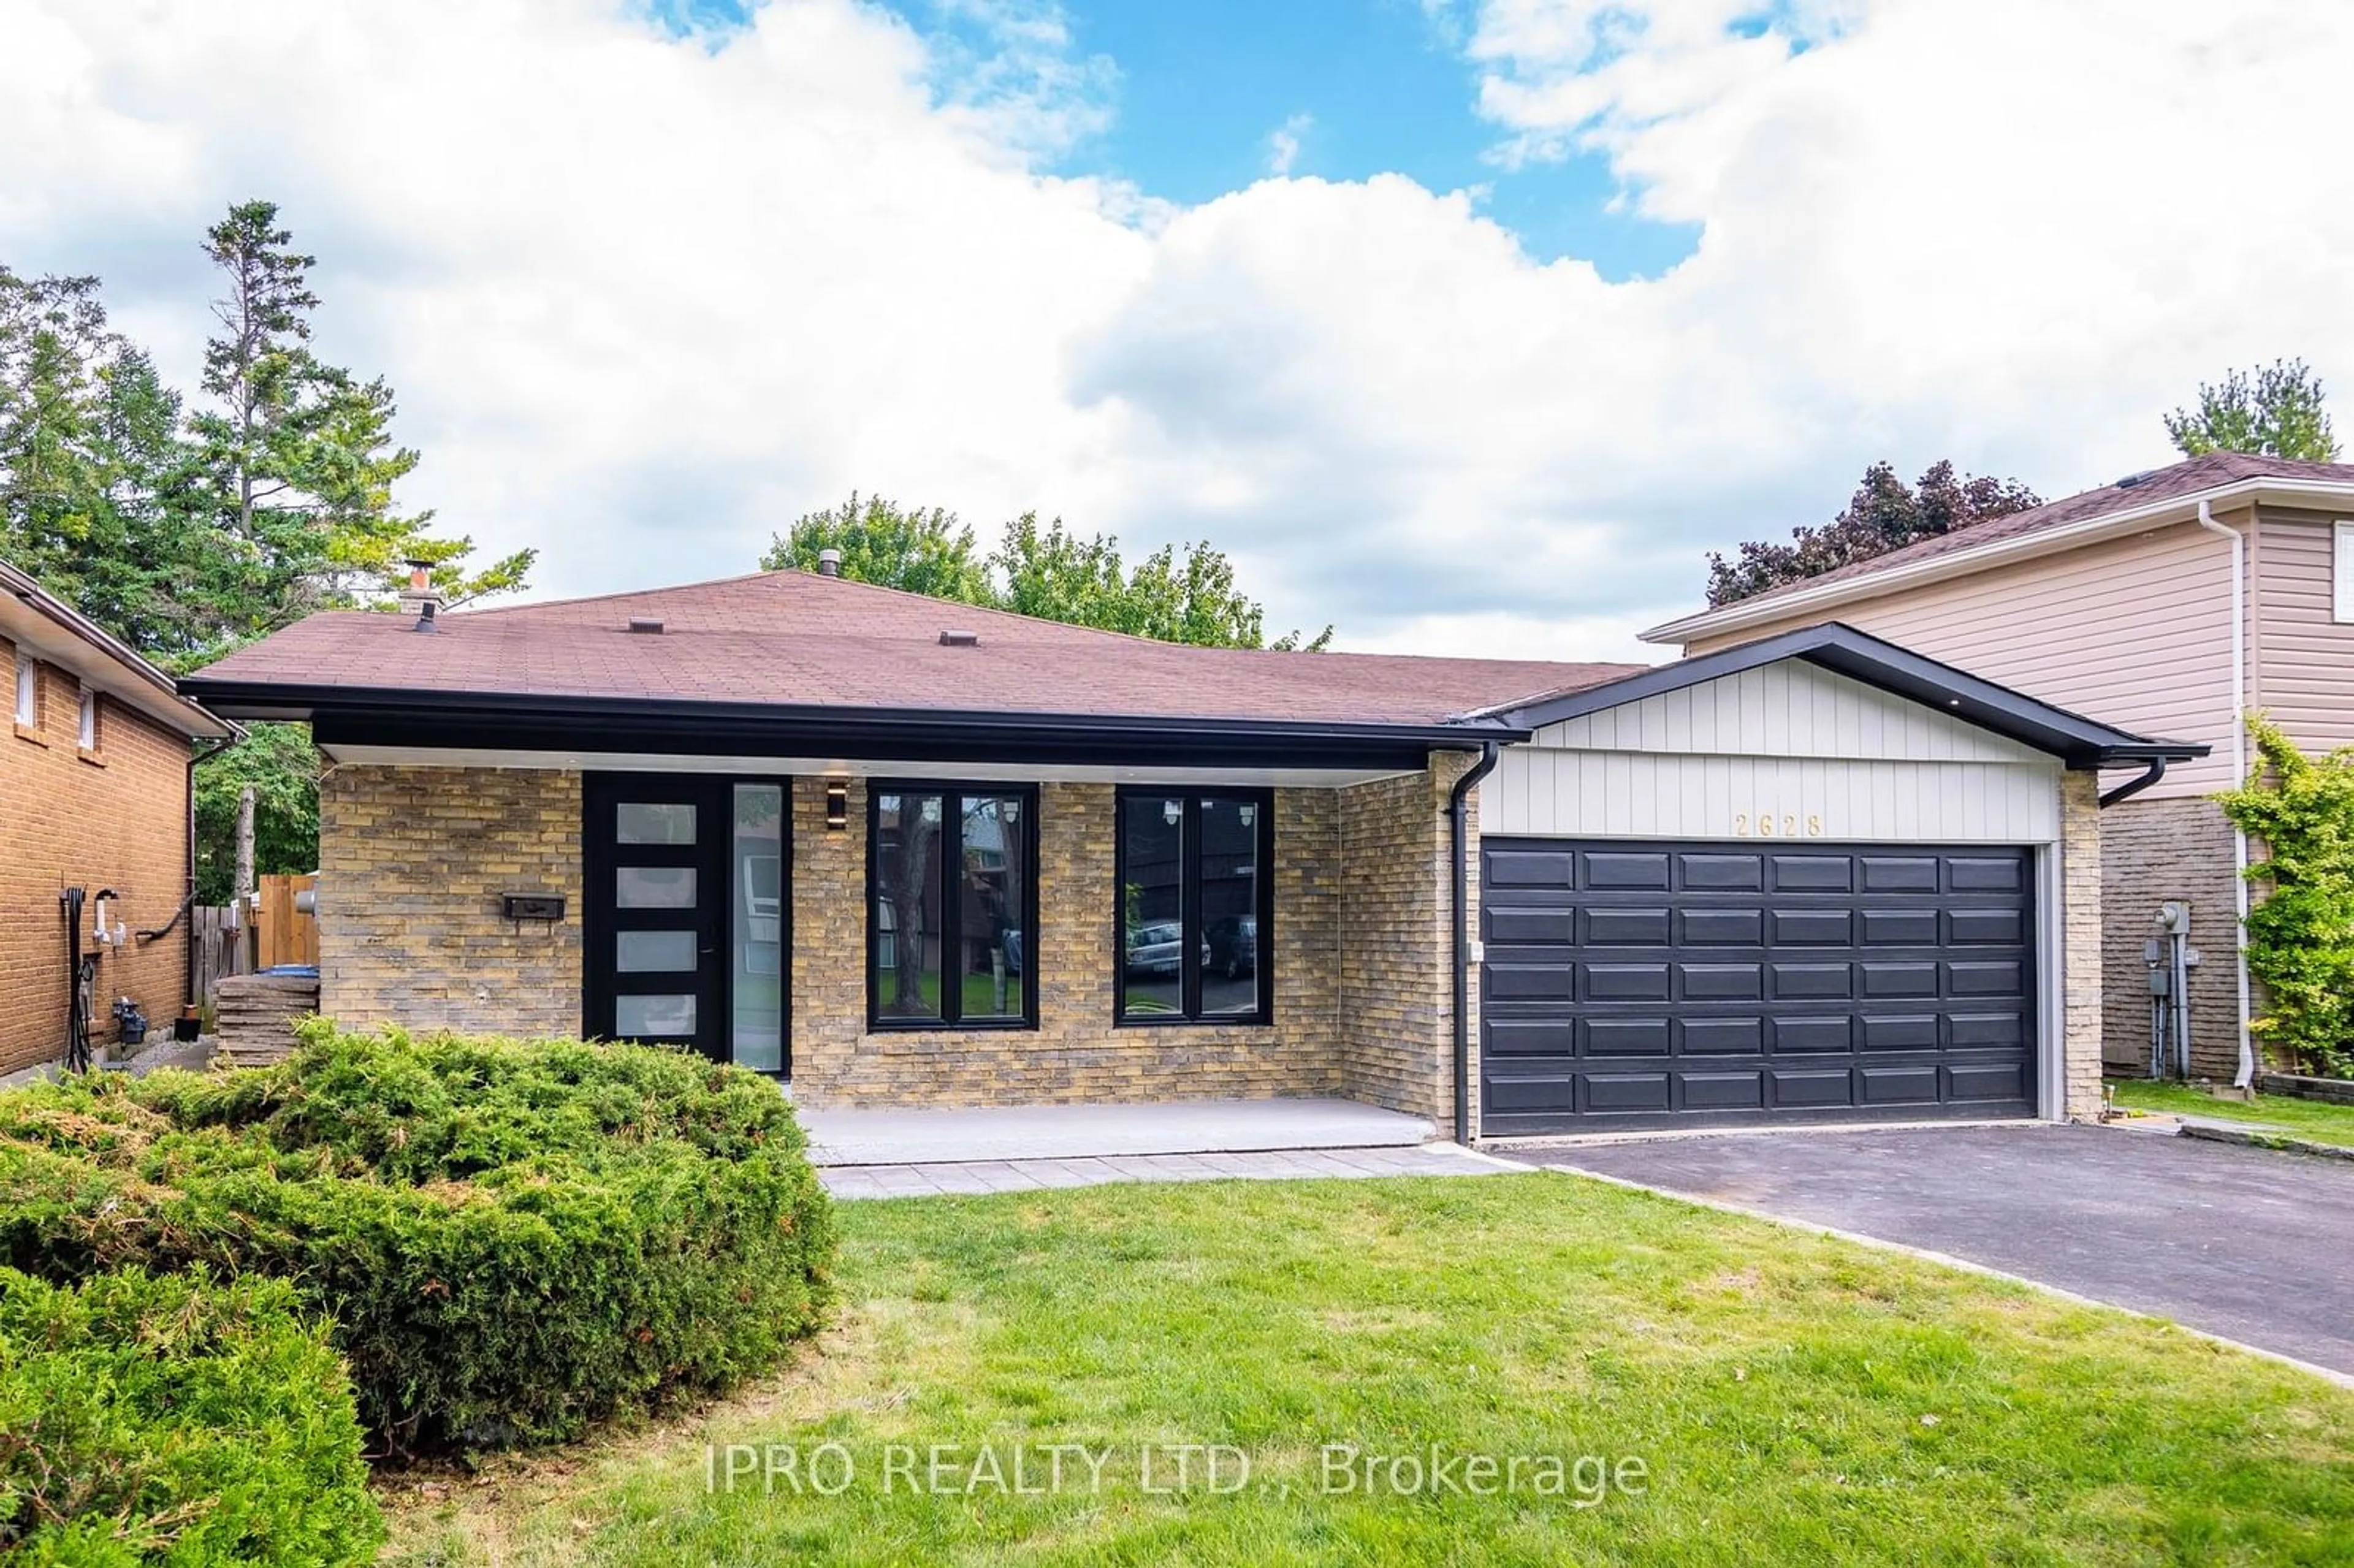 Home with brick exterior material for 2628 Council Ring Rd, Mississauga Ontario L5L 1W4